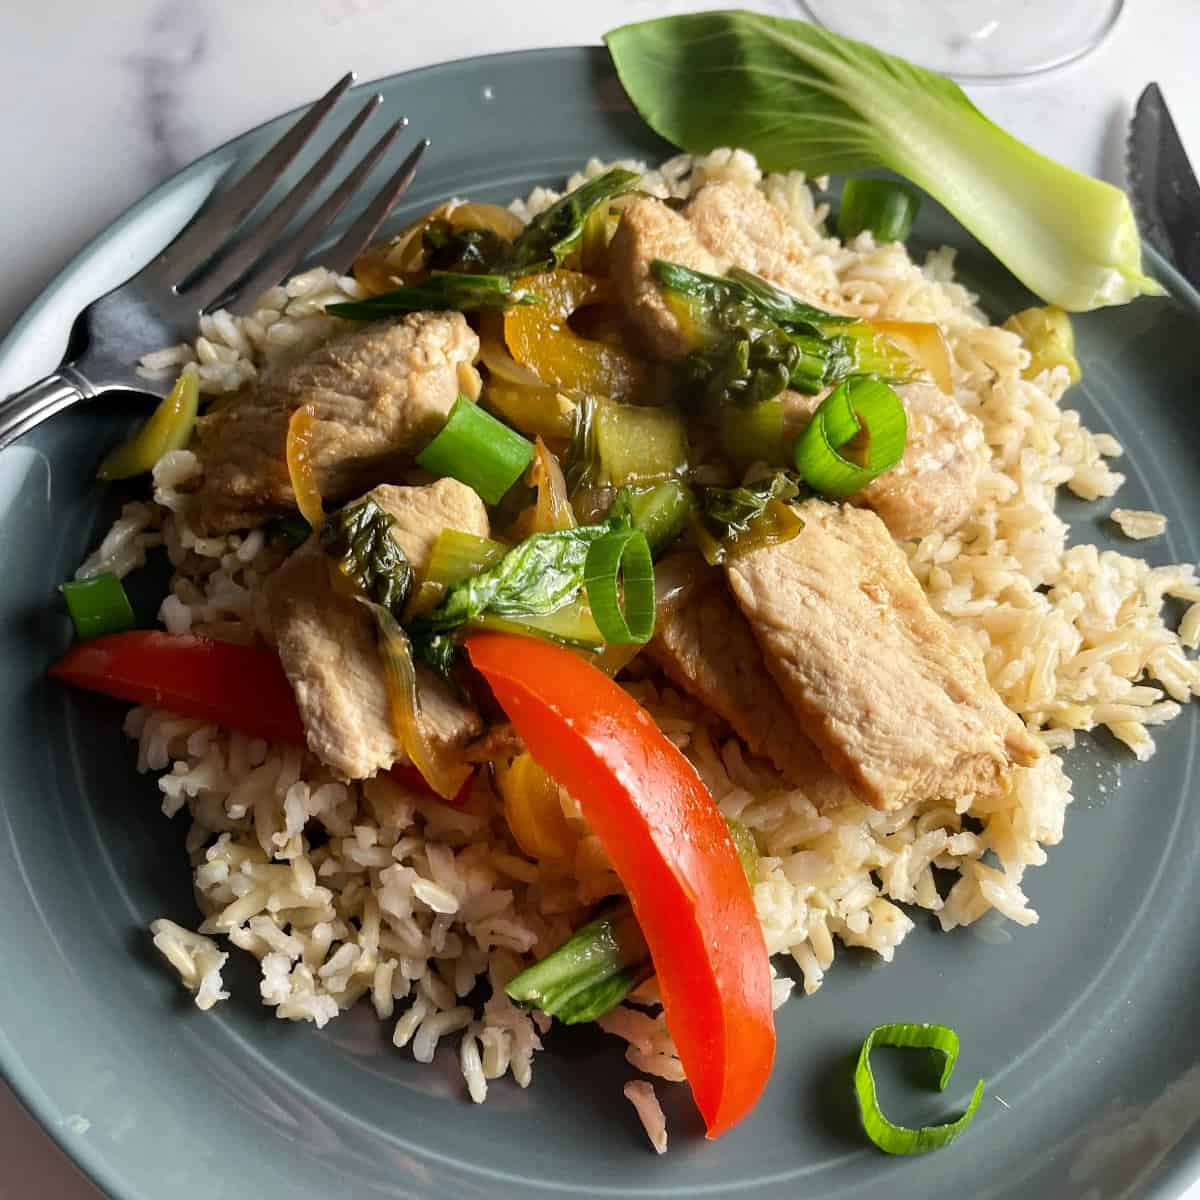 pork and bok choy stir fry with red bell peppers, served over rice on a gray plate.